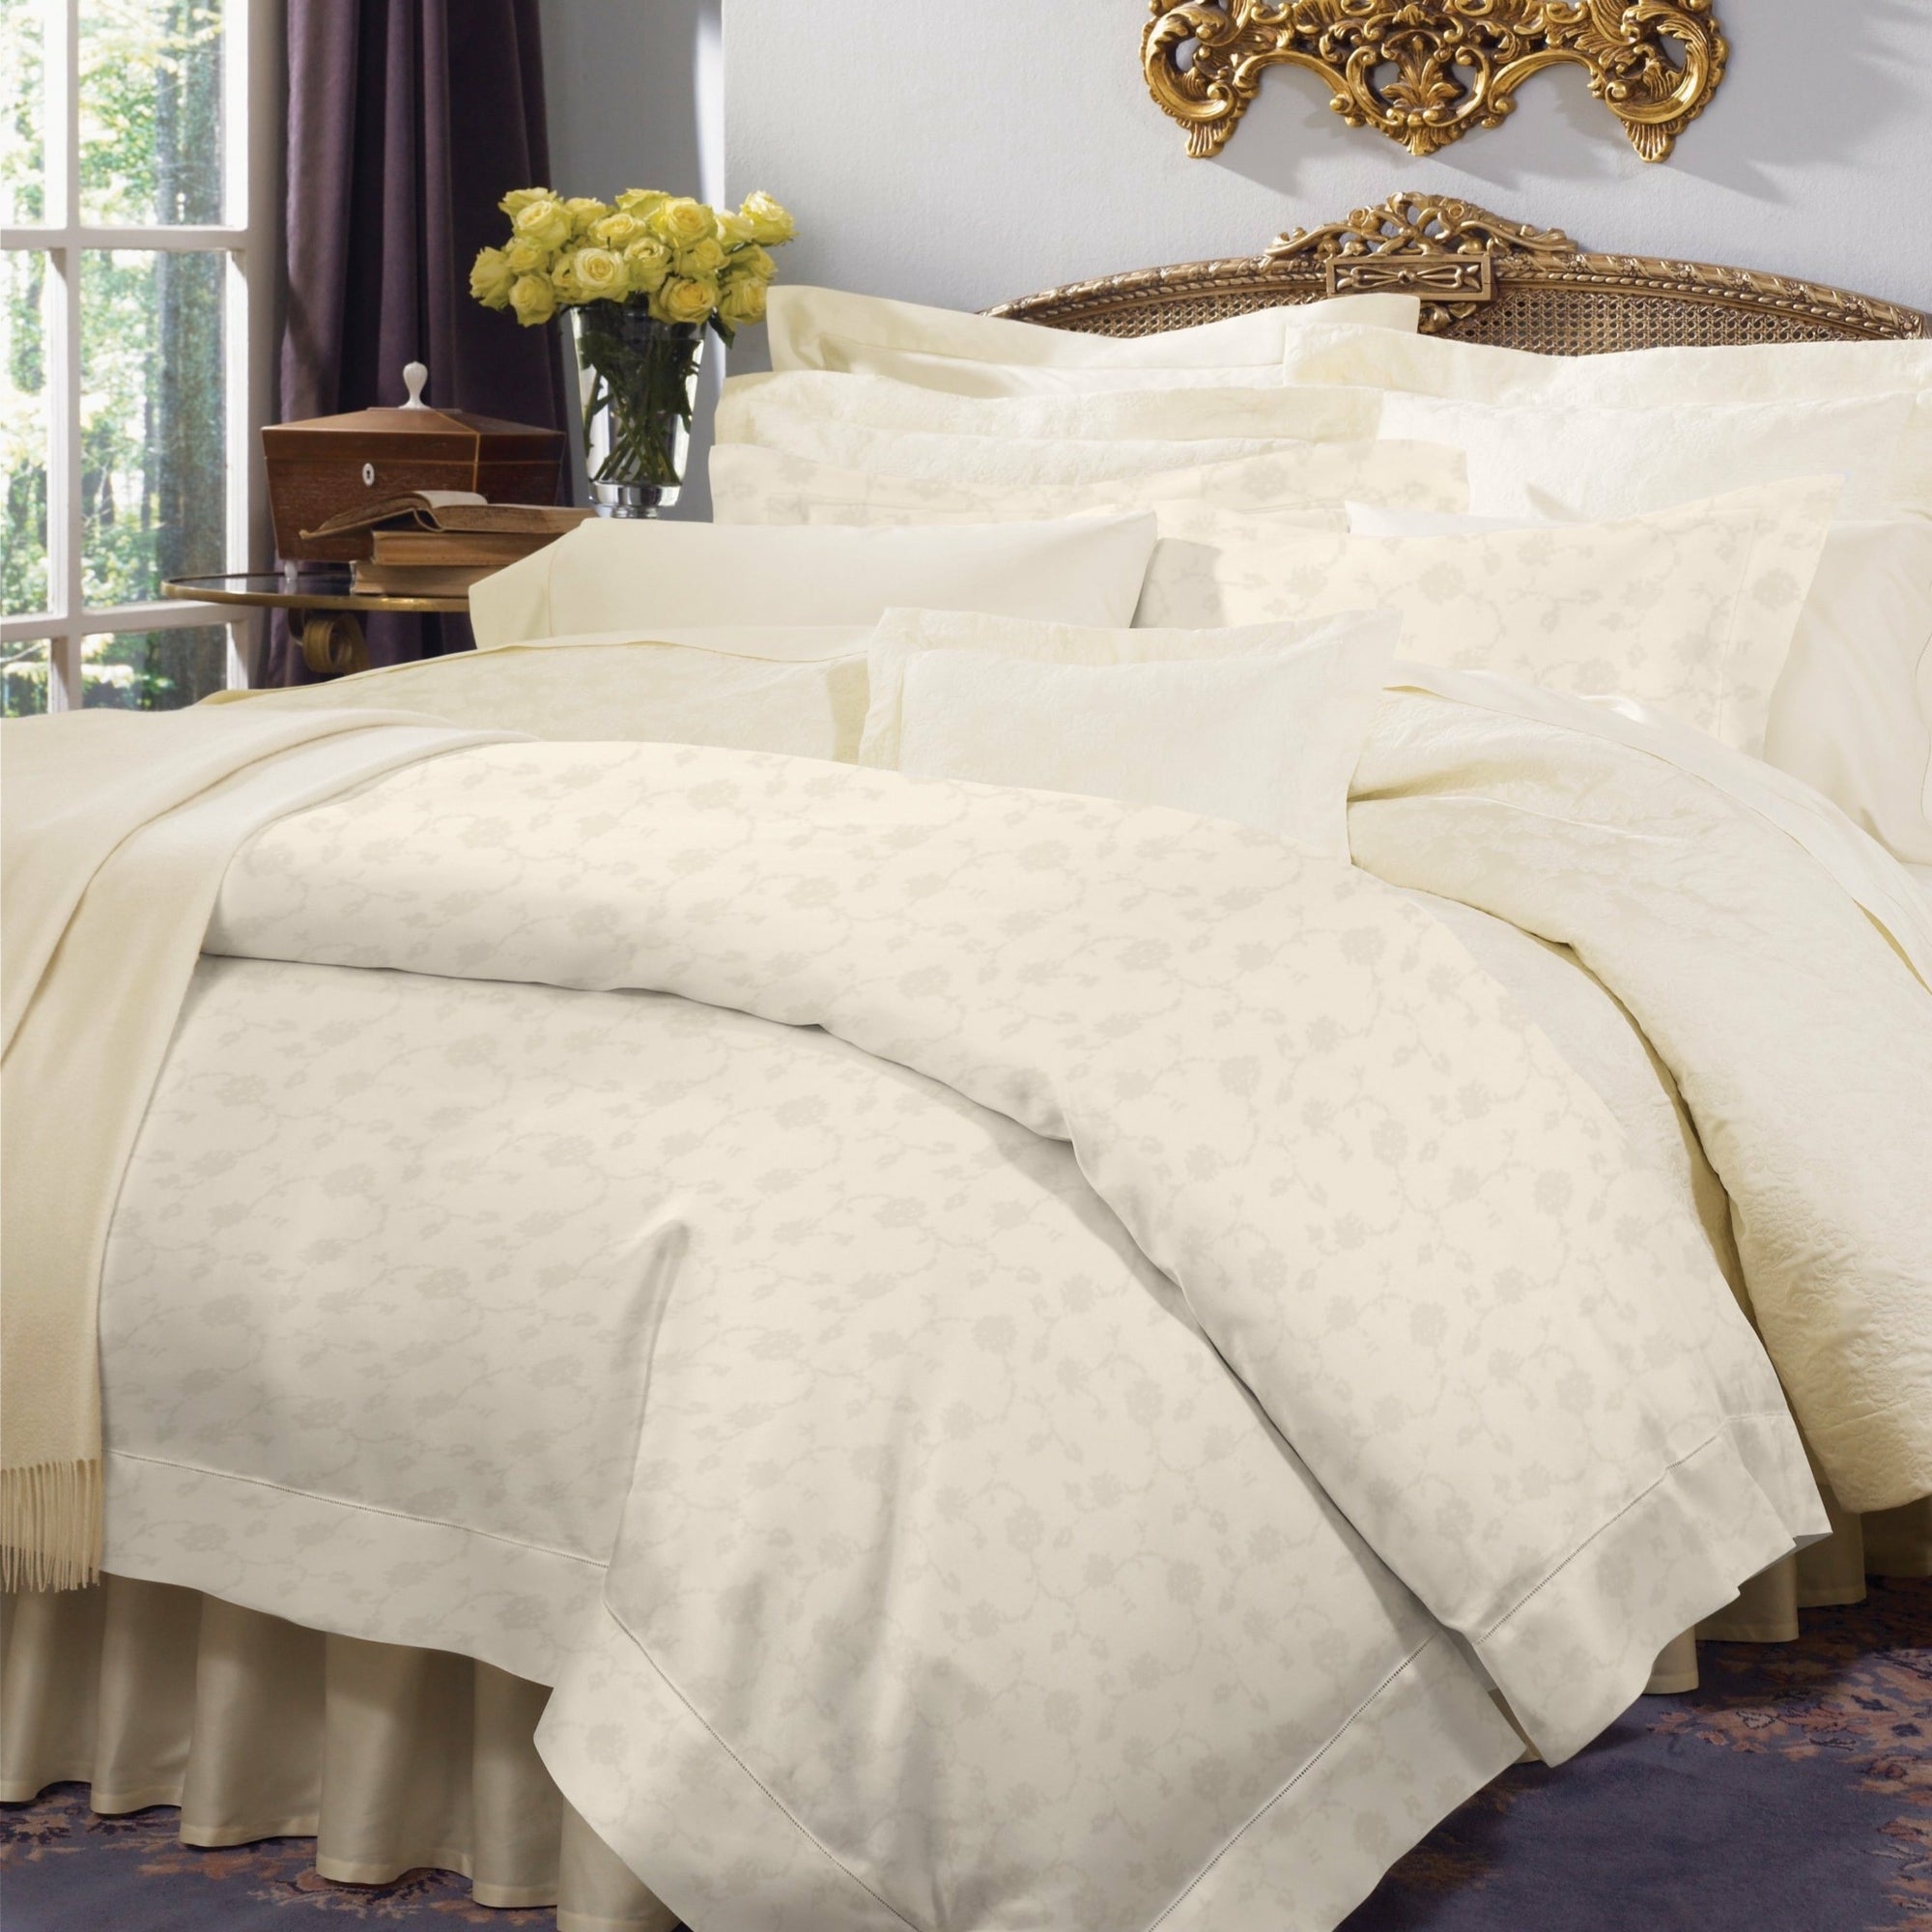 Full Lifestyle Image of Sferra Giza 45 Jacquard Bedding in Color Ivory